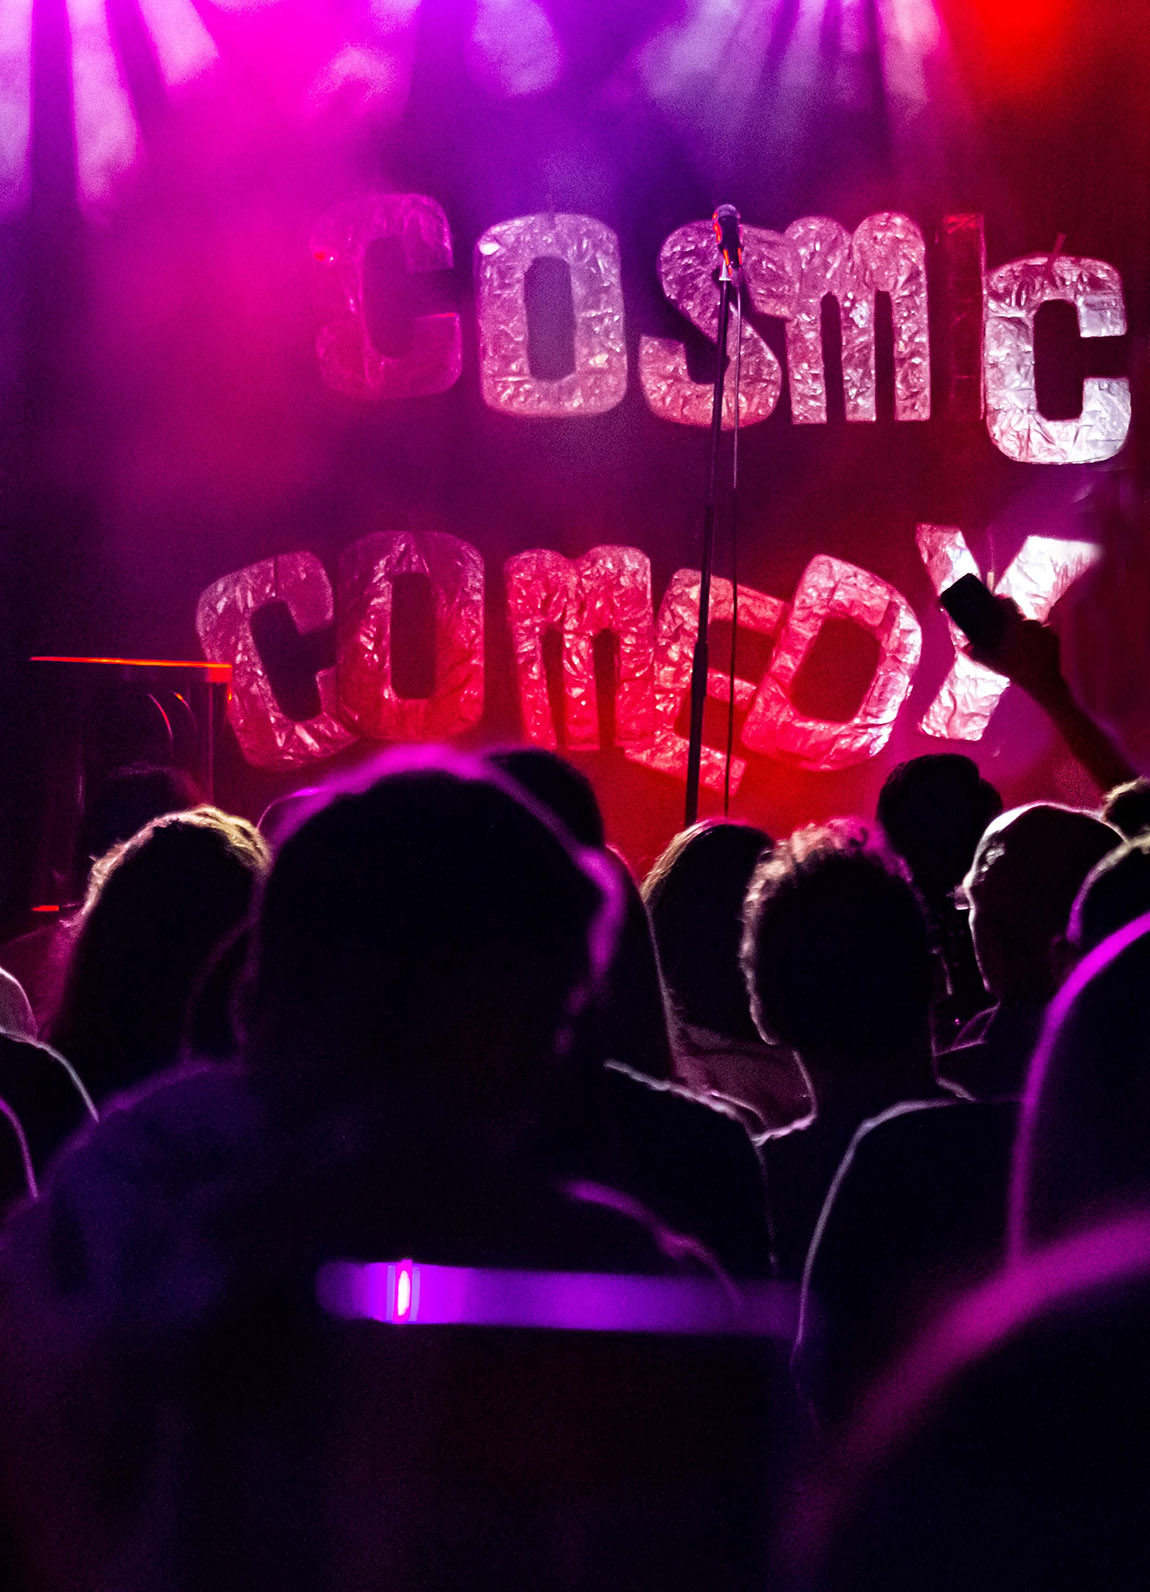 More than laughs: Cosmic Comedy Berlin